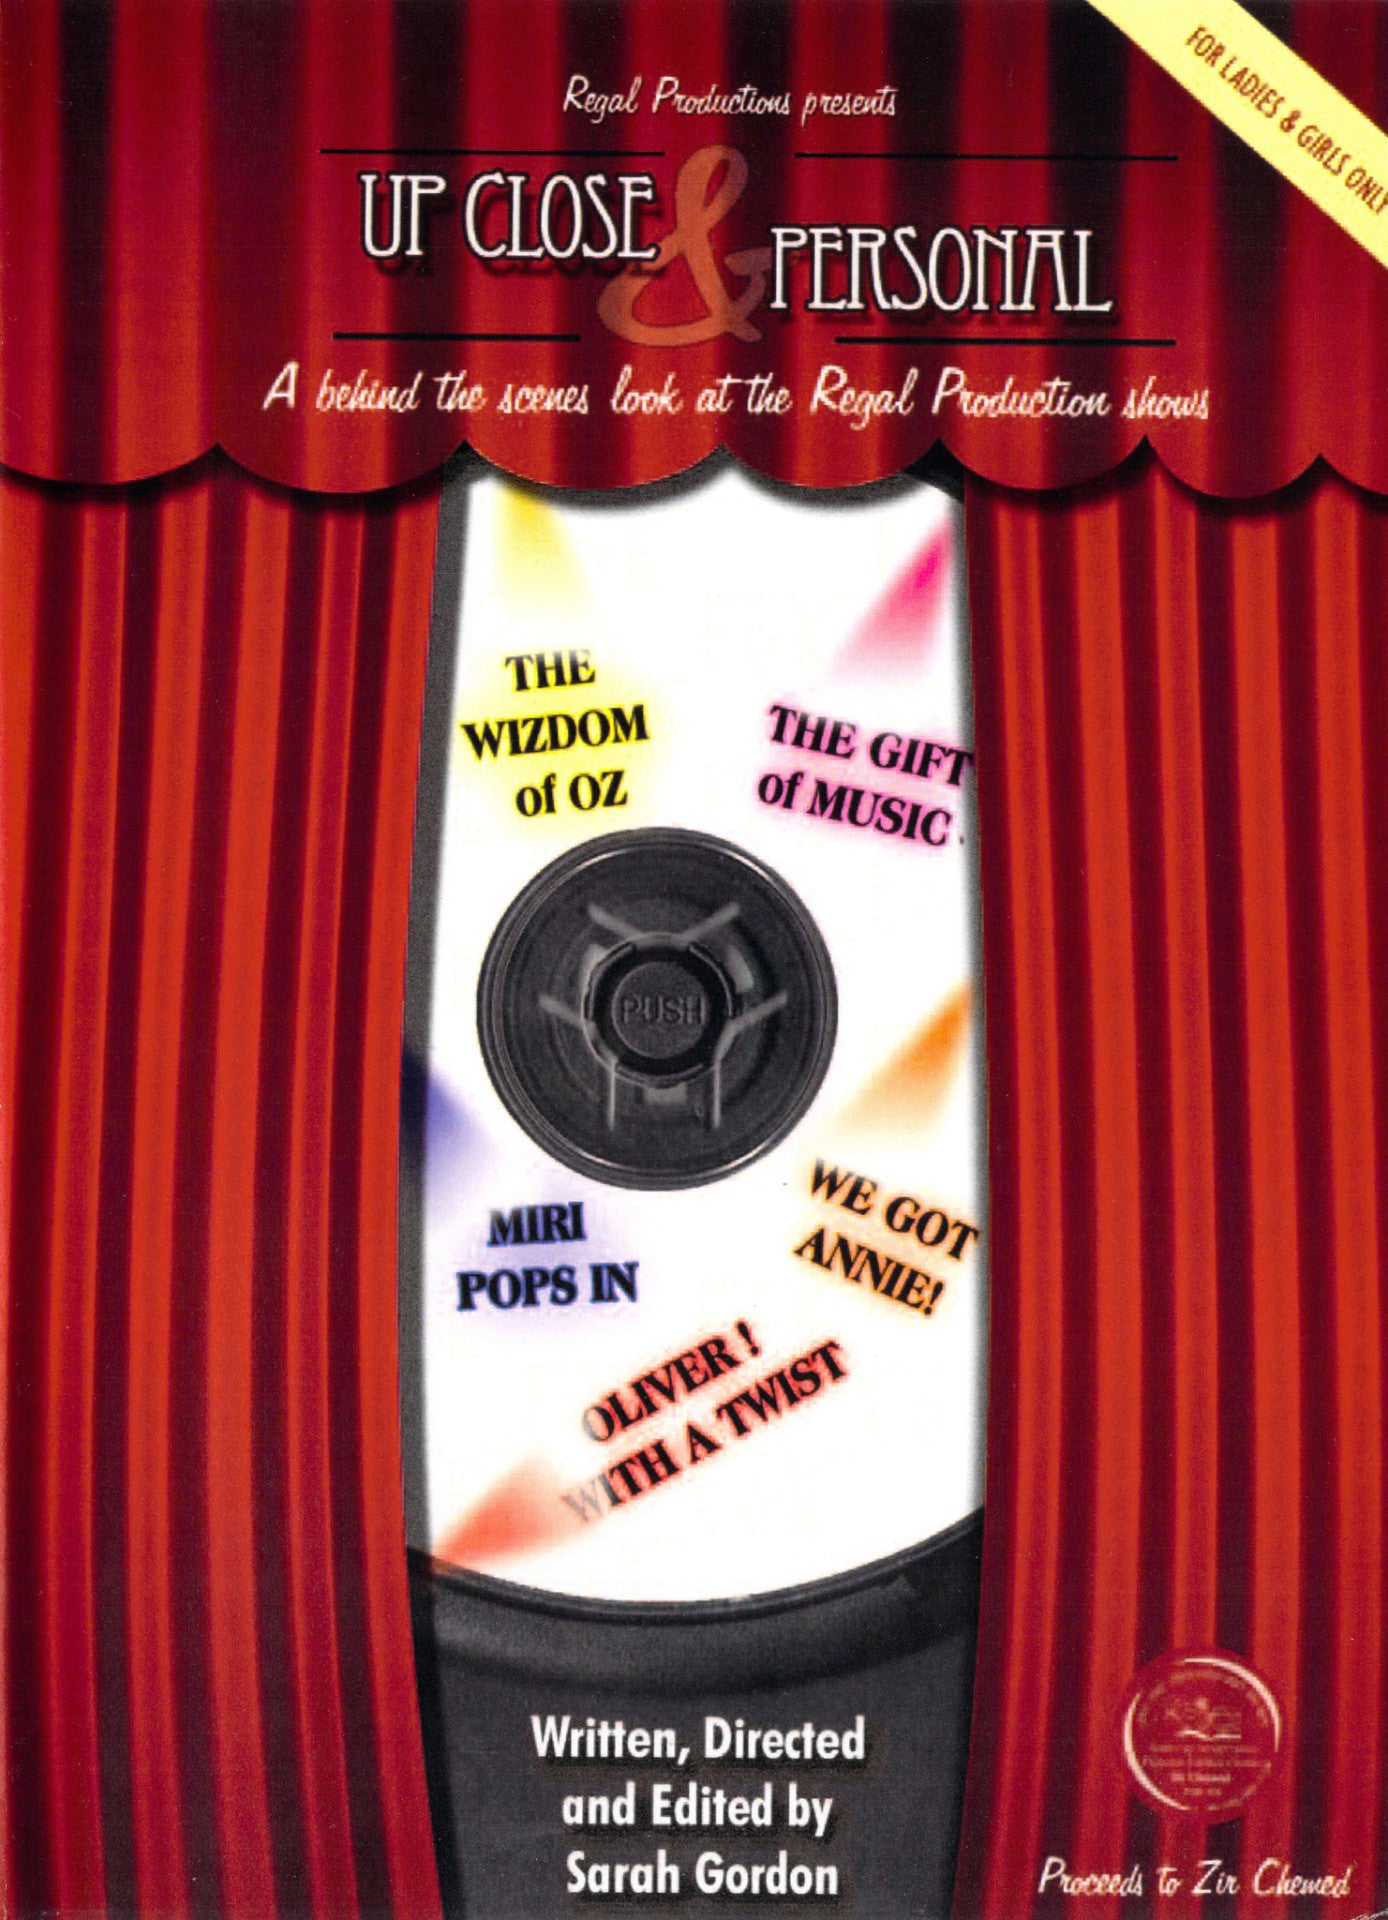 Up Close And Personal - DVD